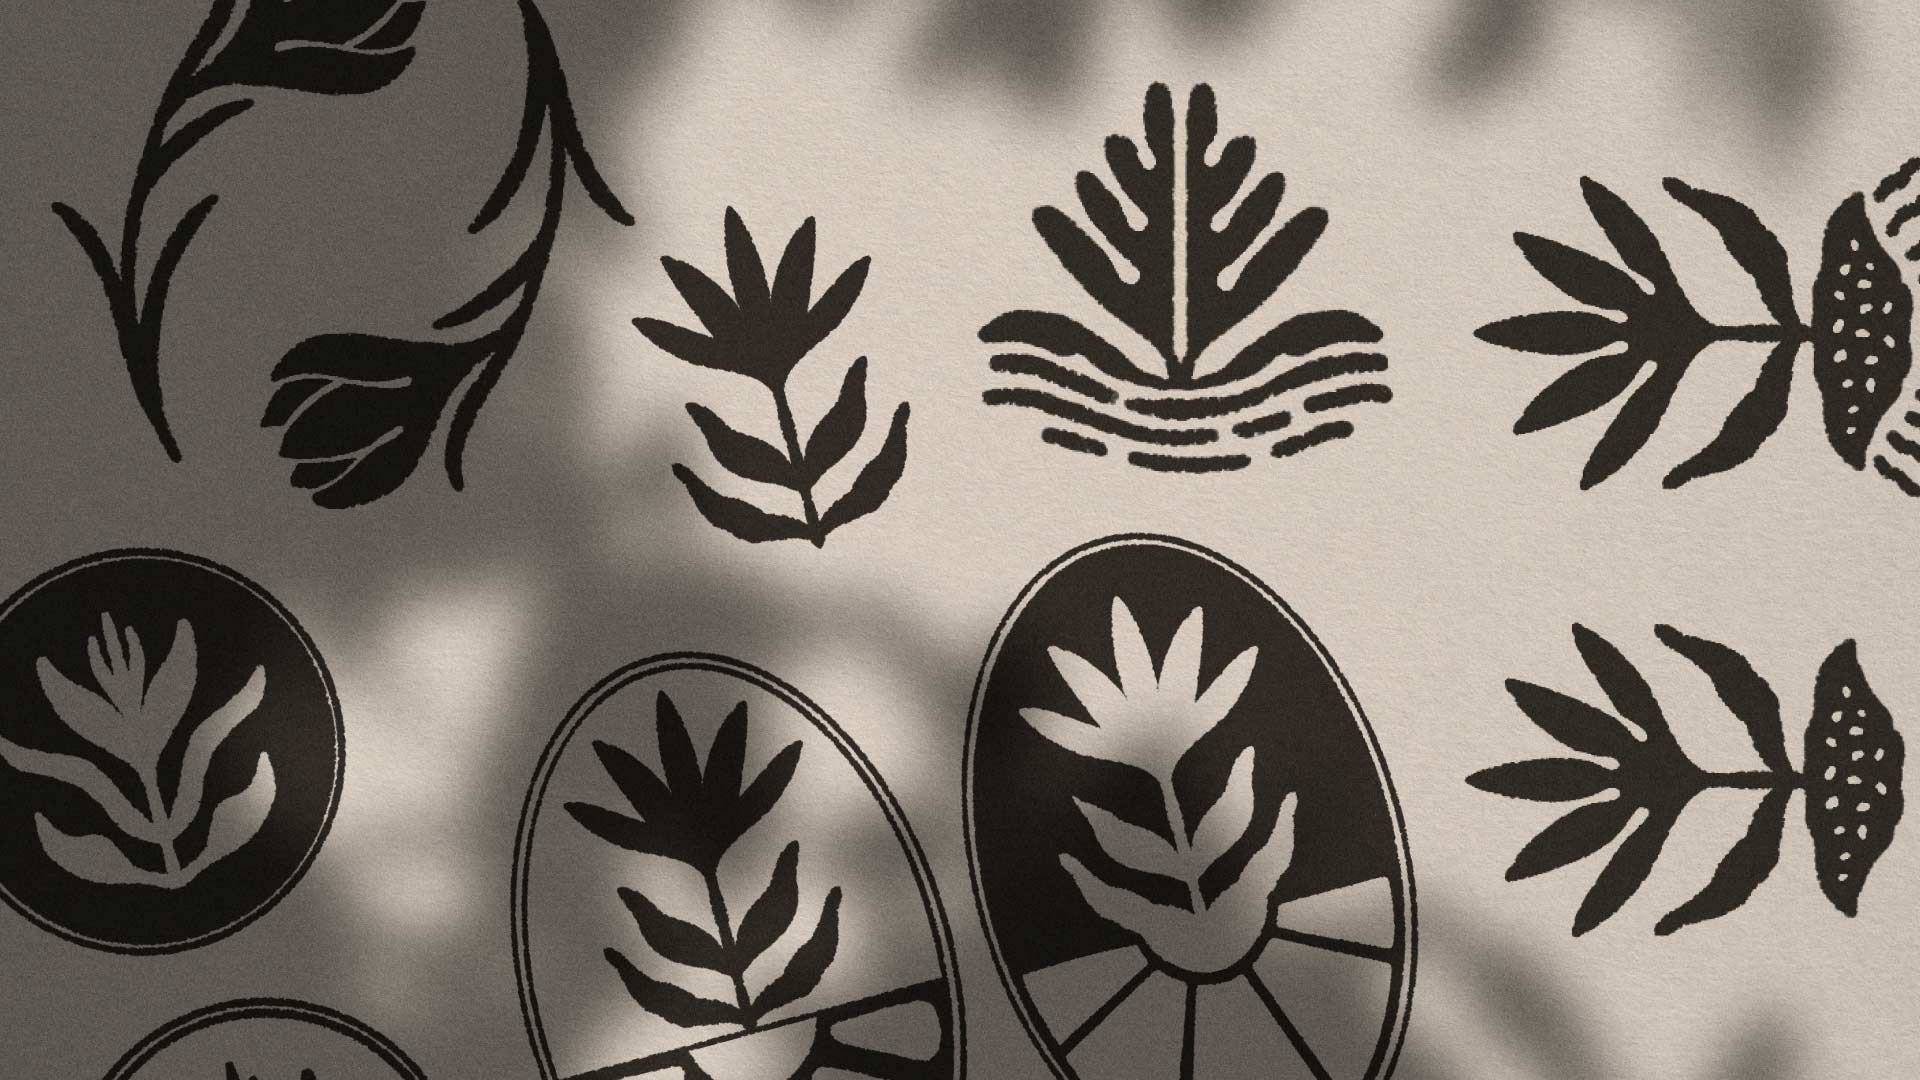 Stamp logo iterations on a white paper with organic shadows above